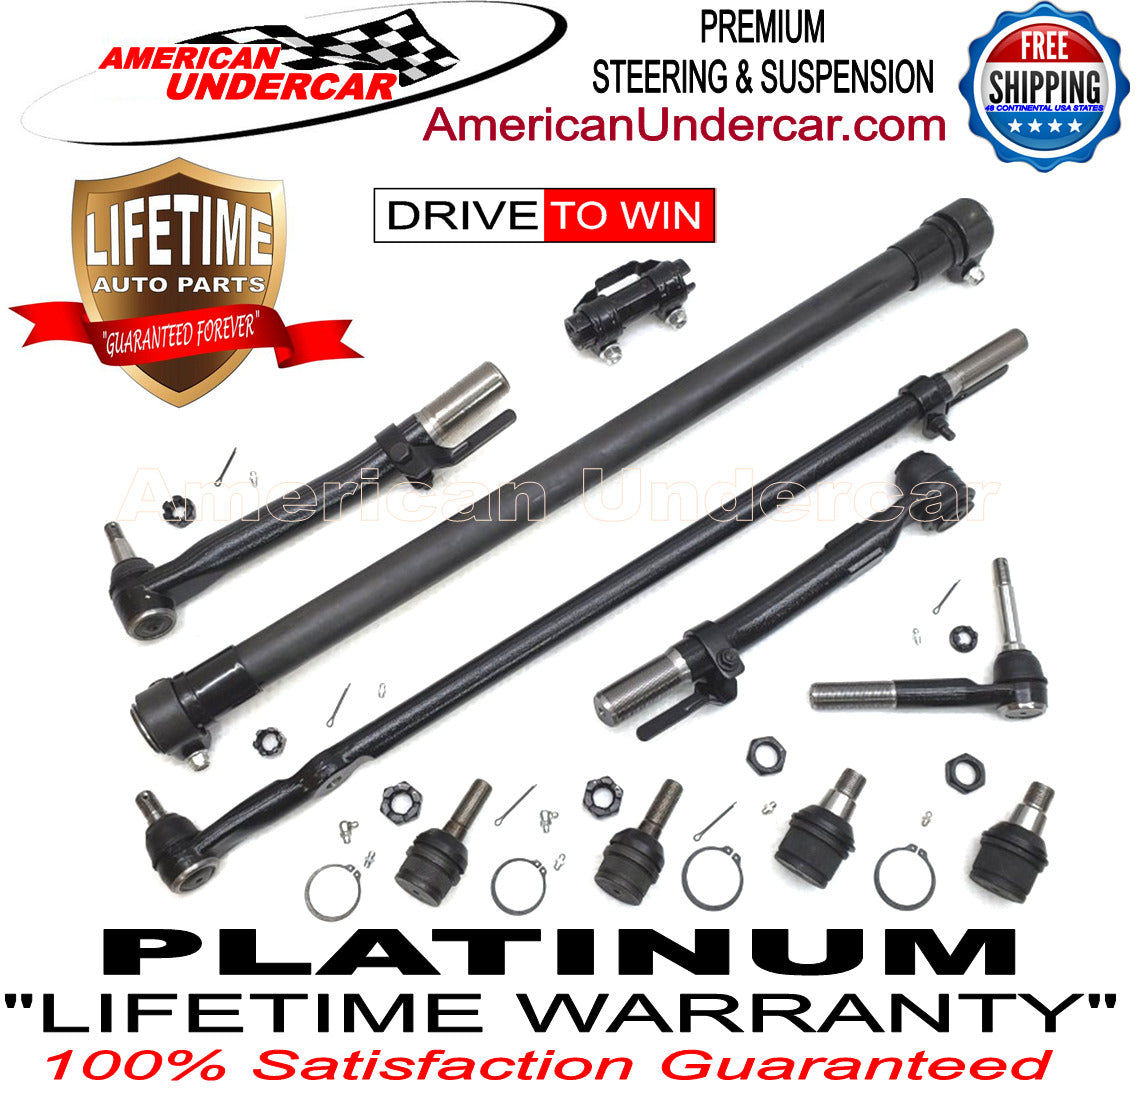 Lifetime Ball Joints Tie Rods Drag Link Steering Kit for 2011-2016 Ford F250, F350 Super Duty 4x4 SRW